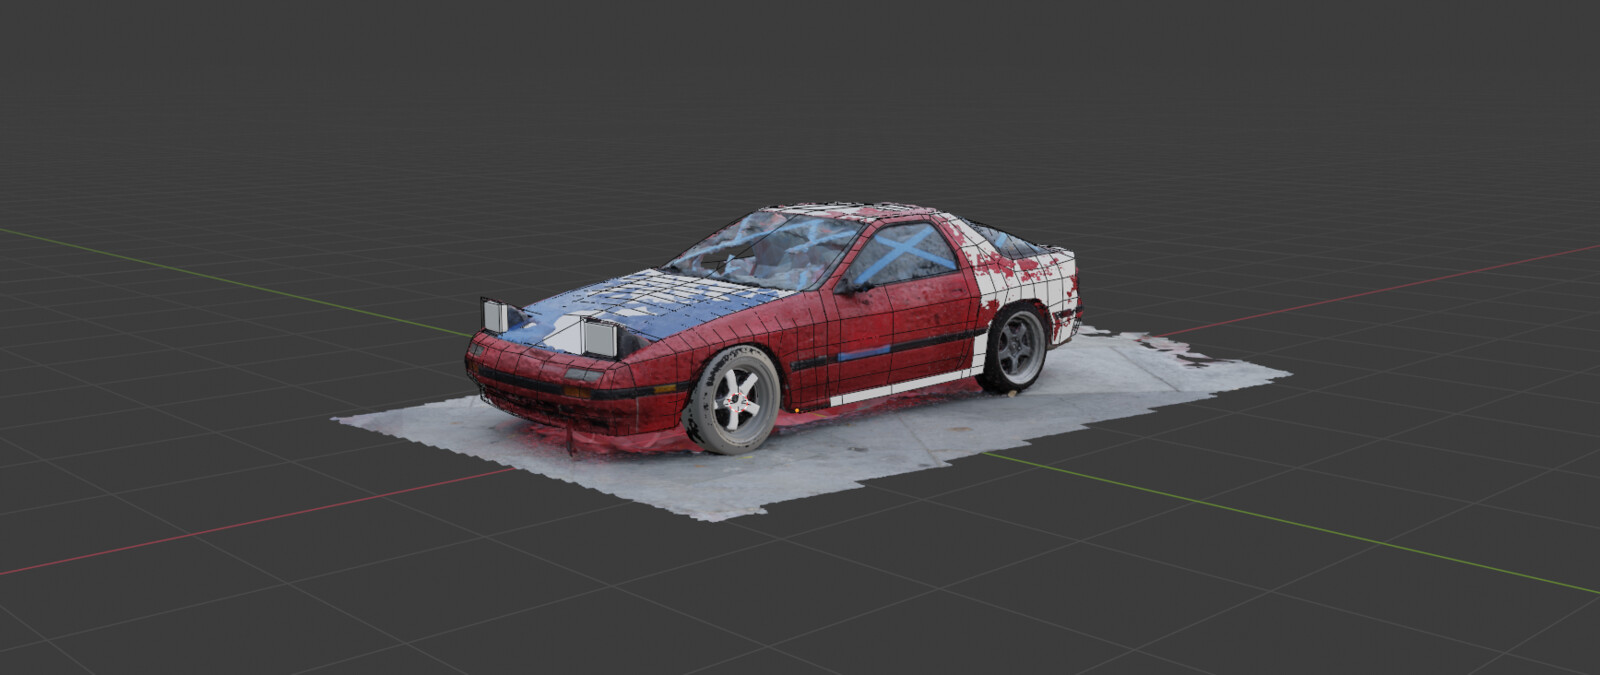 An awesome photogrammetry project of my RX-7. I plan on using this model to concept and build parts for the car.